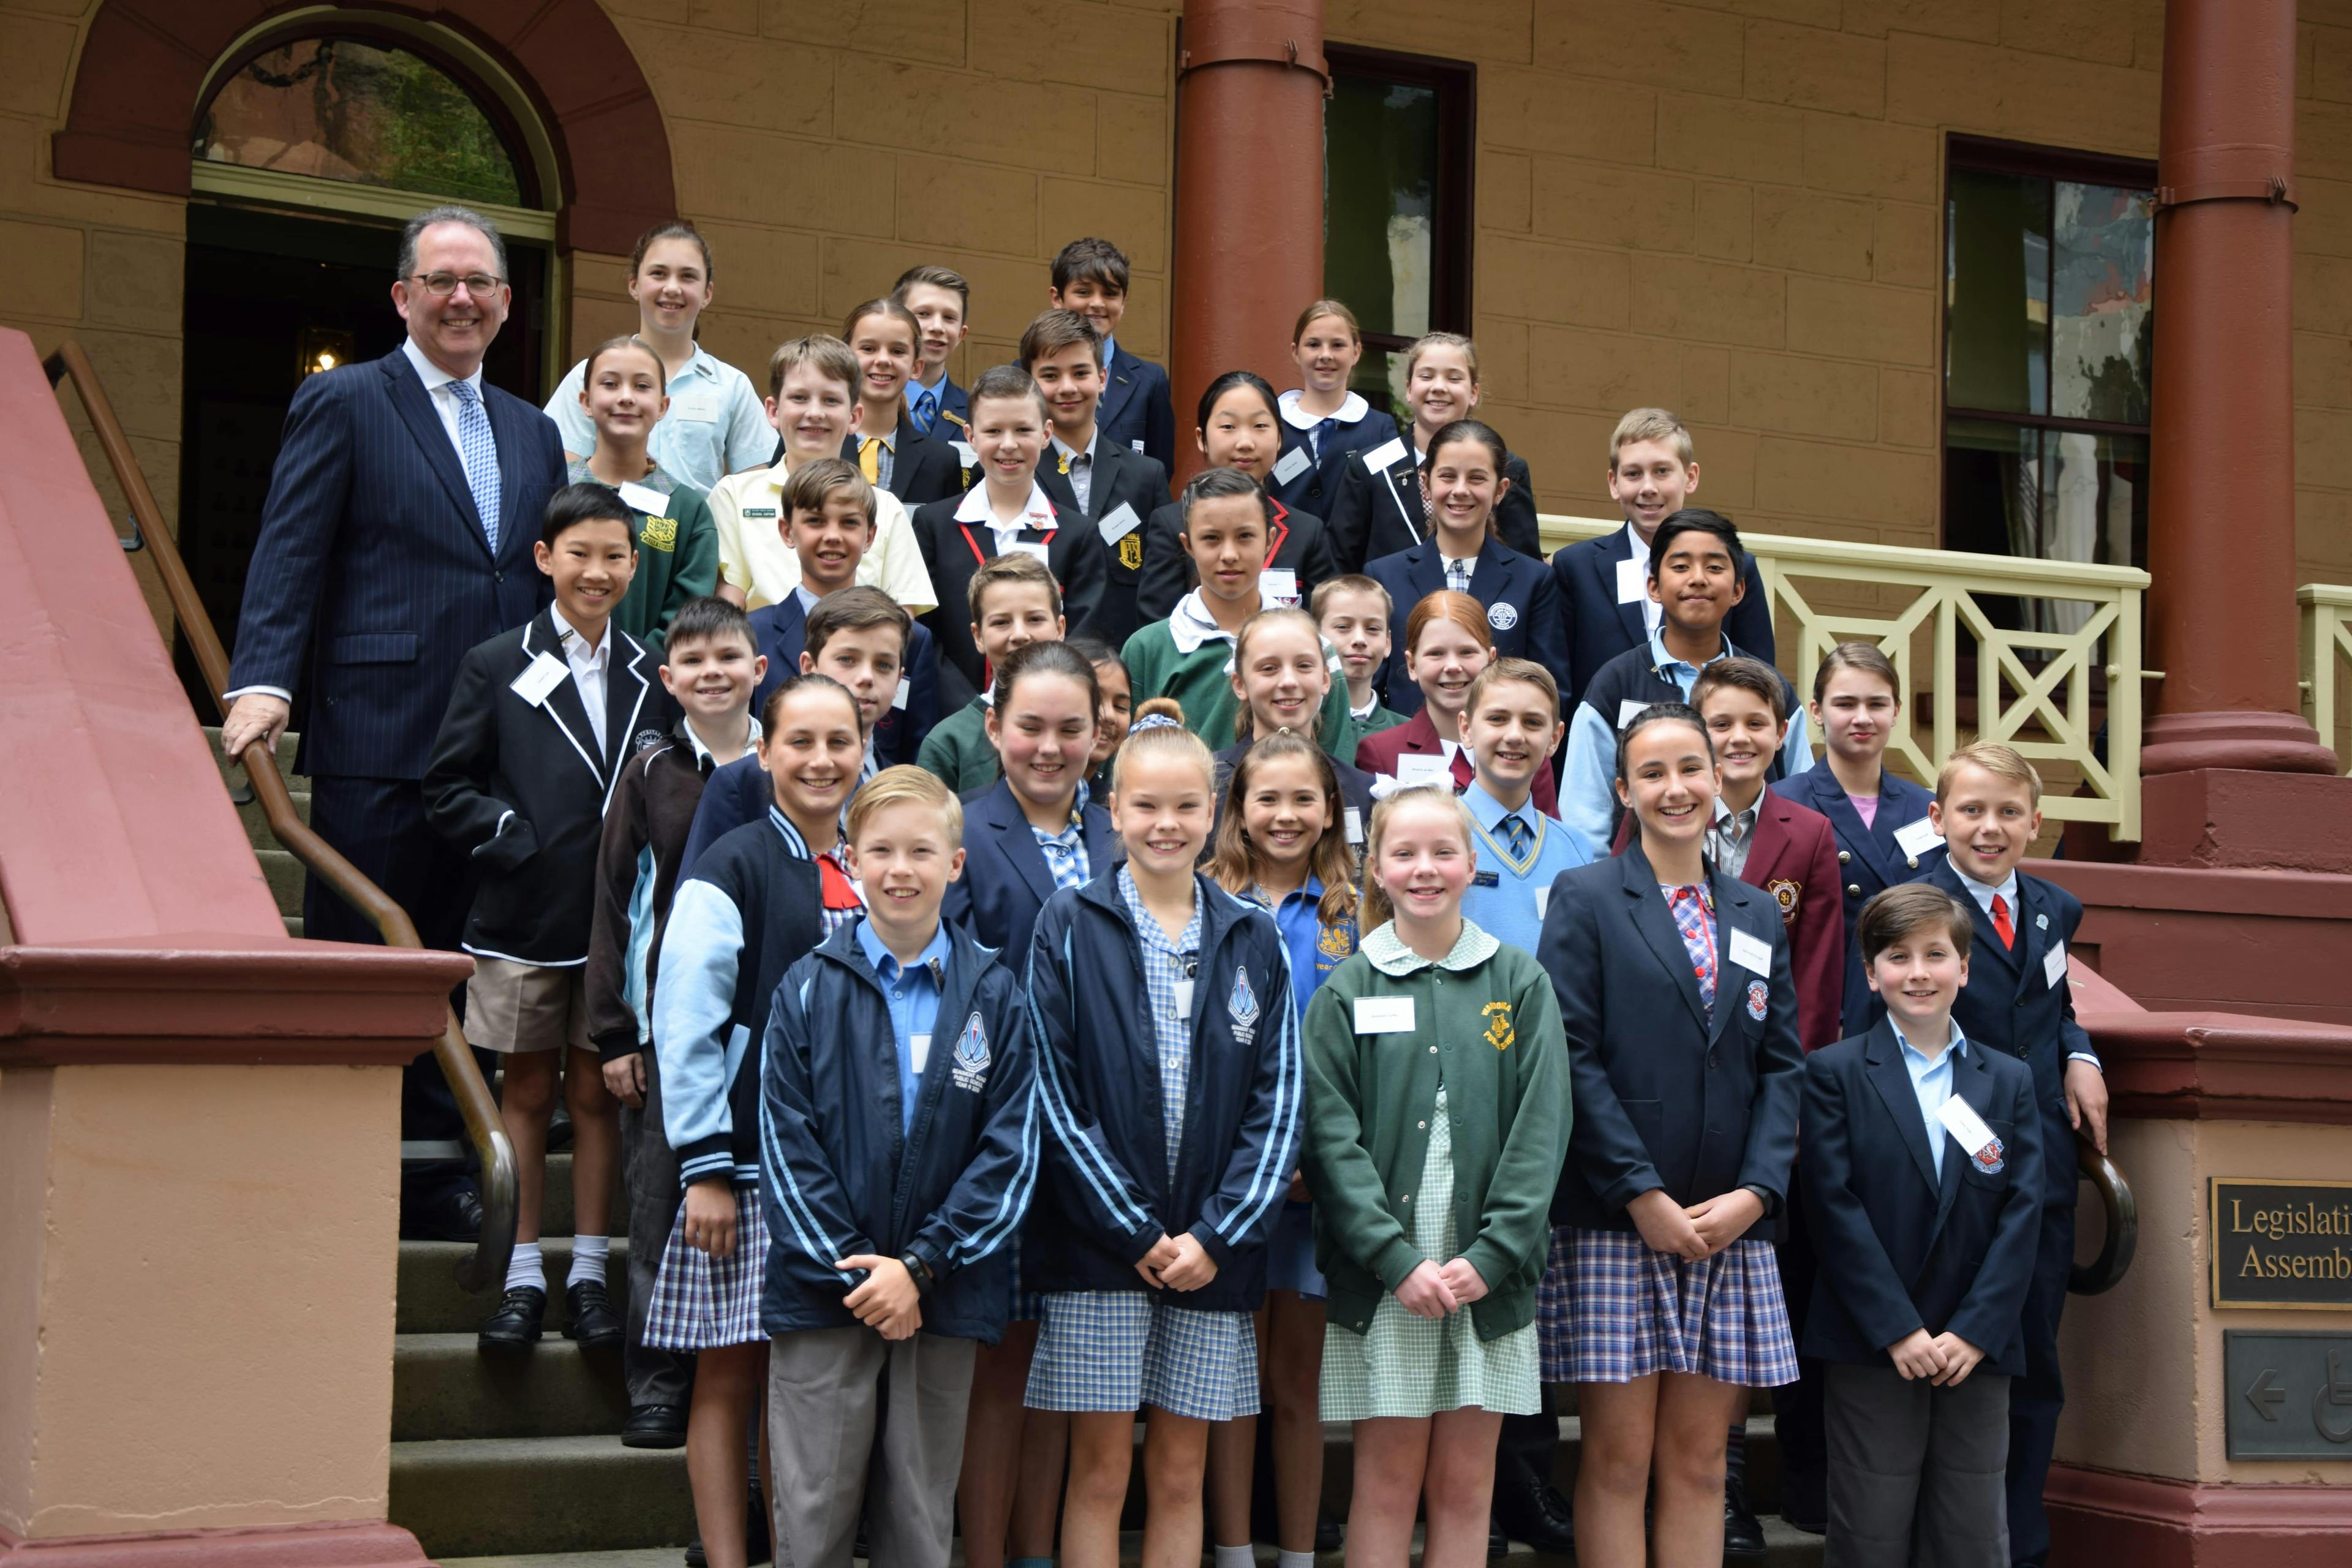 Primary School Leaders Morning Tea at Parliament House 2019 